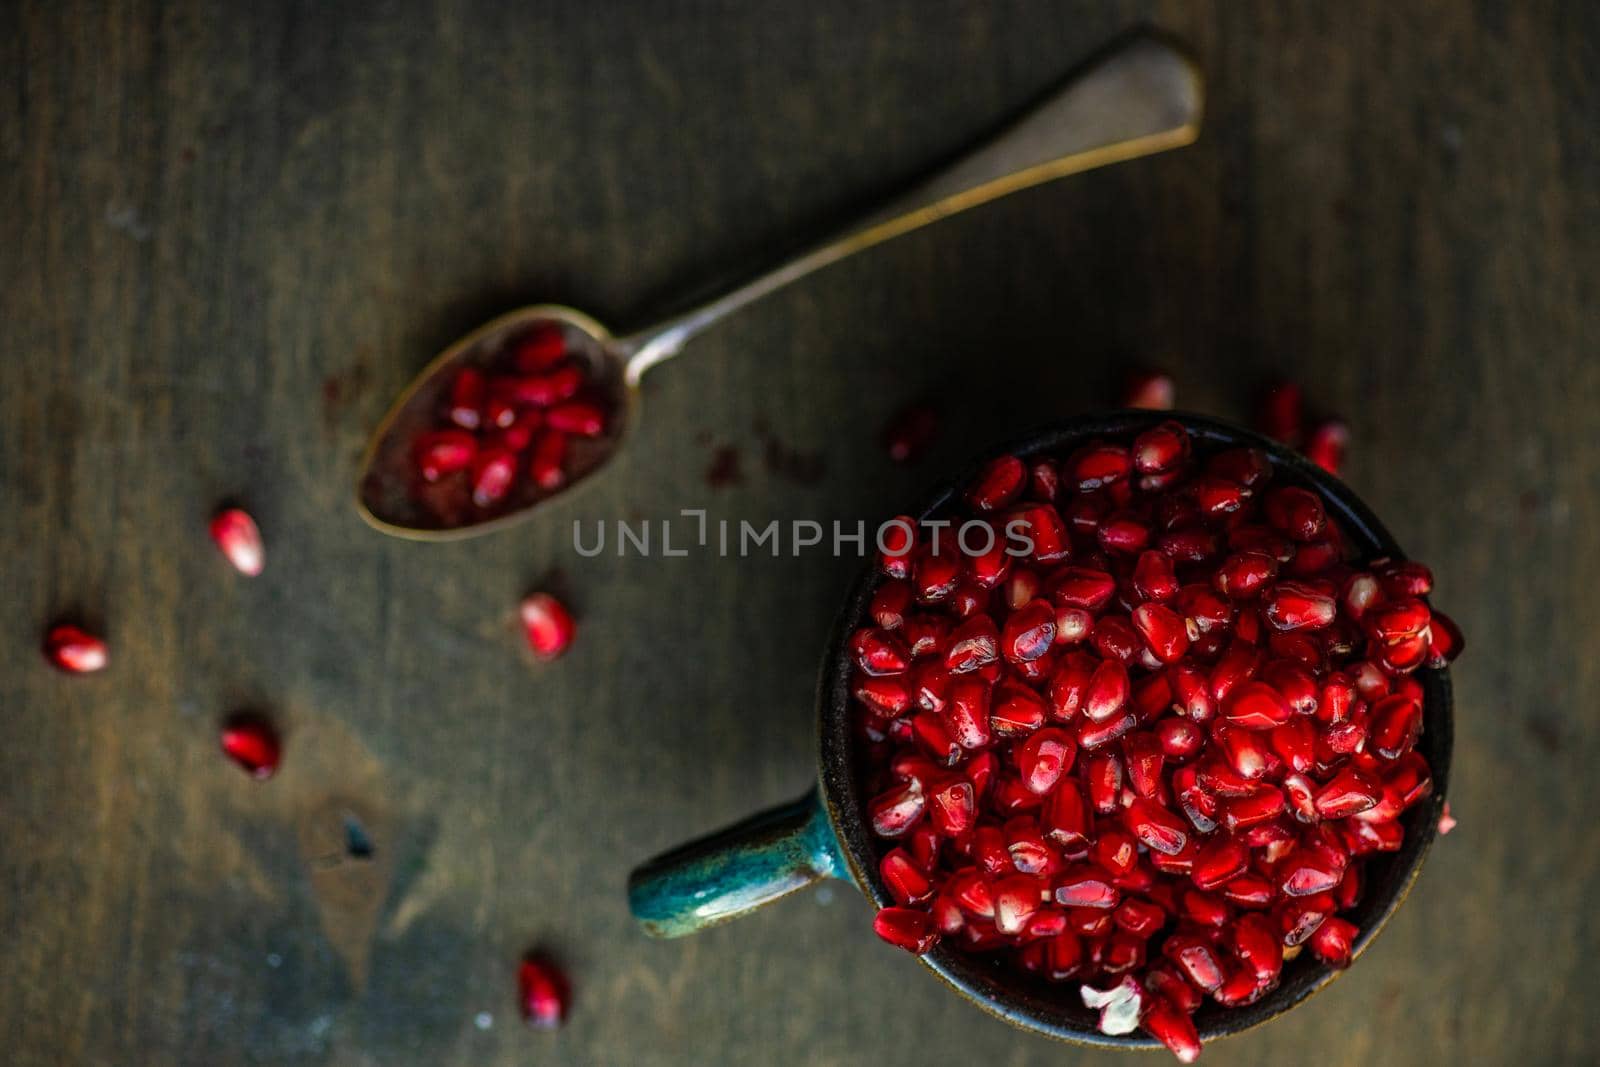 Ripe organic pomegranate fruit on the ceramic cup and vintage spoon on wooden table